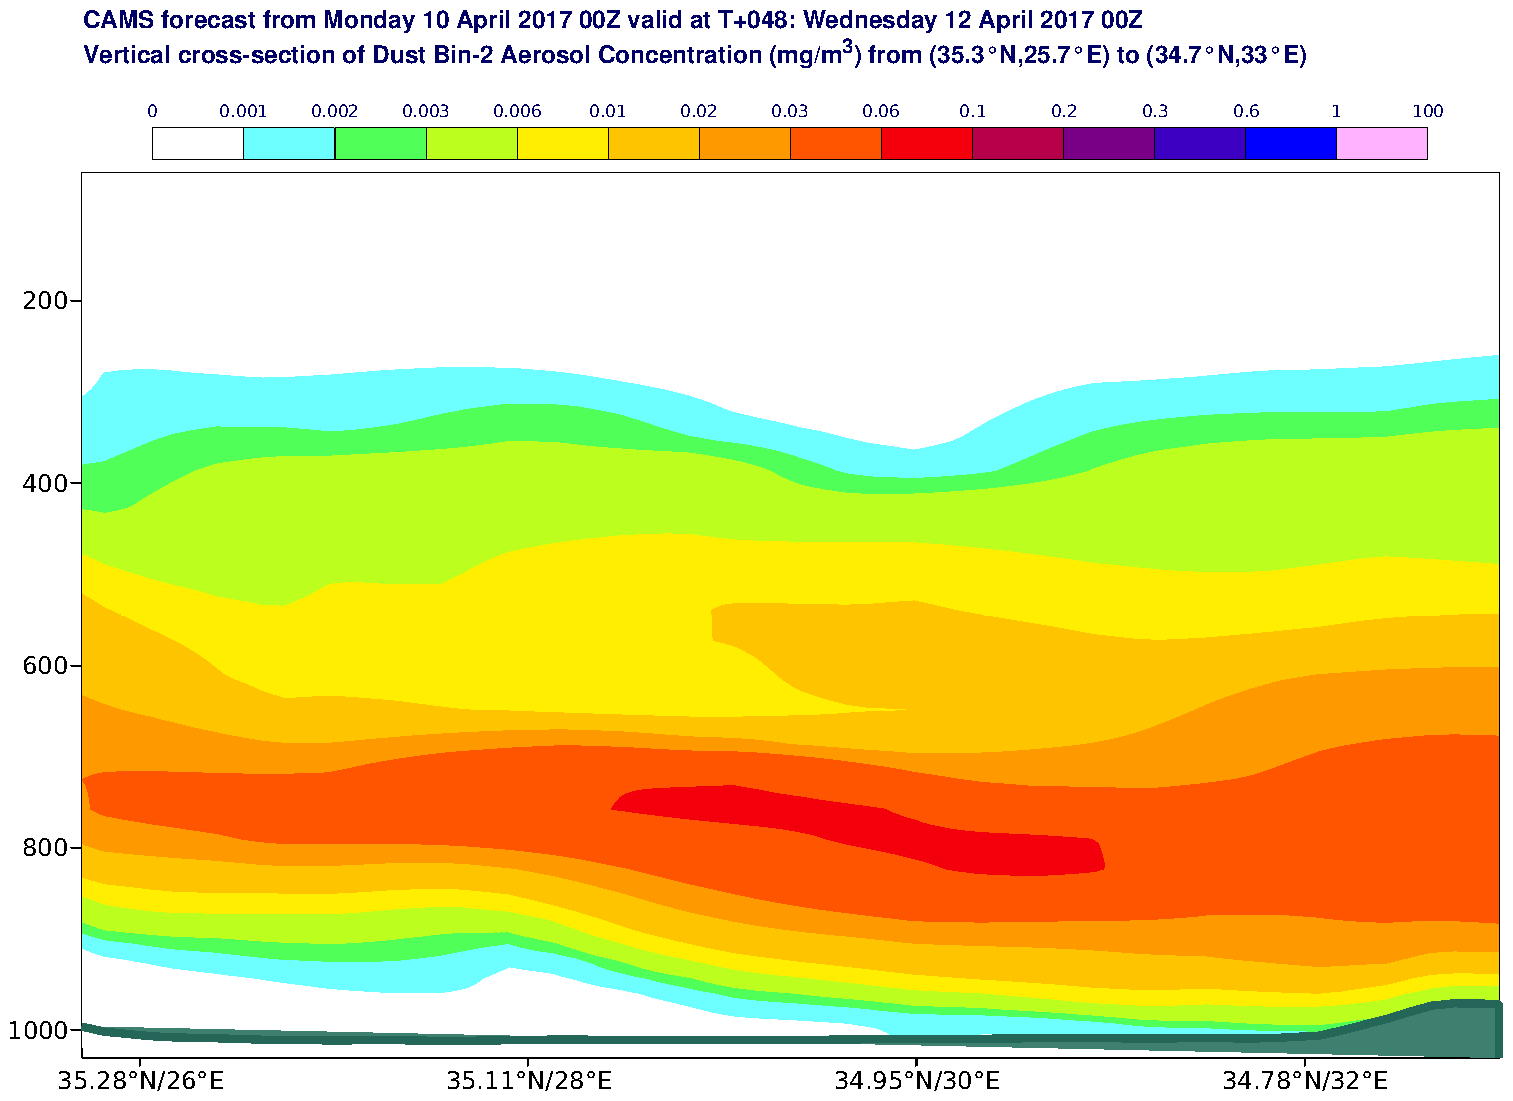 Vertical cross-section of Dust Bin-2 Aerosol Concentration (mg/m3) valid at T48 - 2017-04-12 00:00